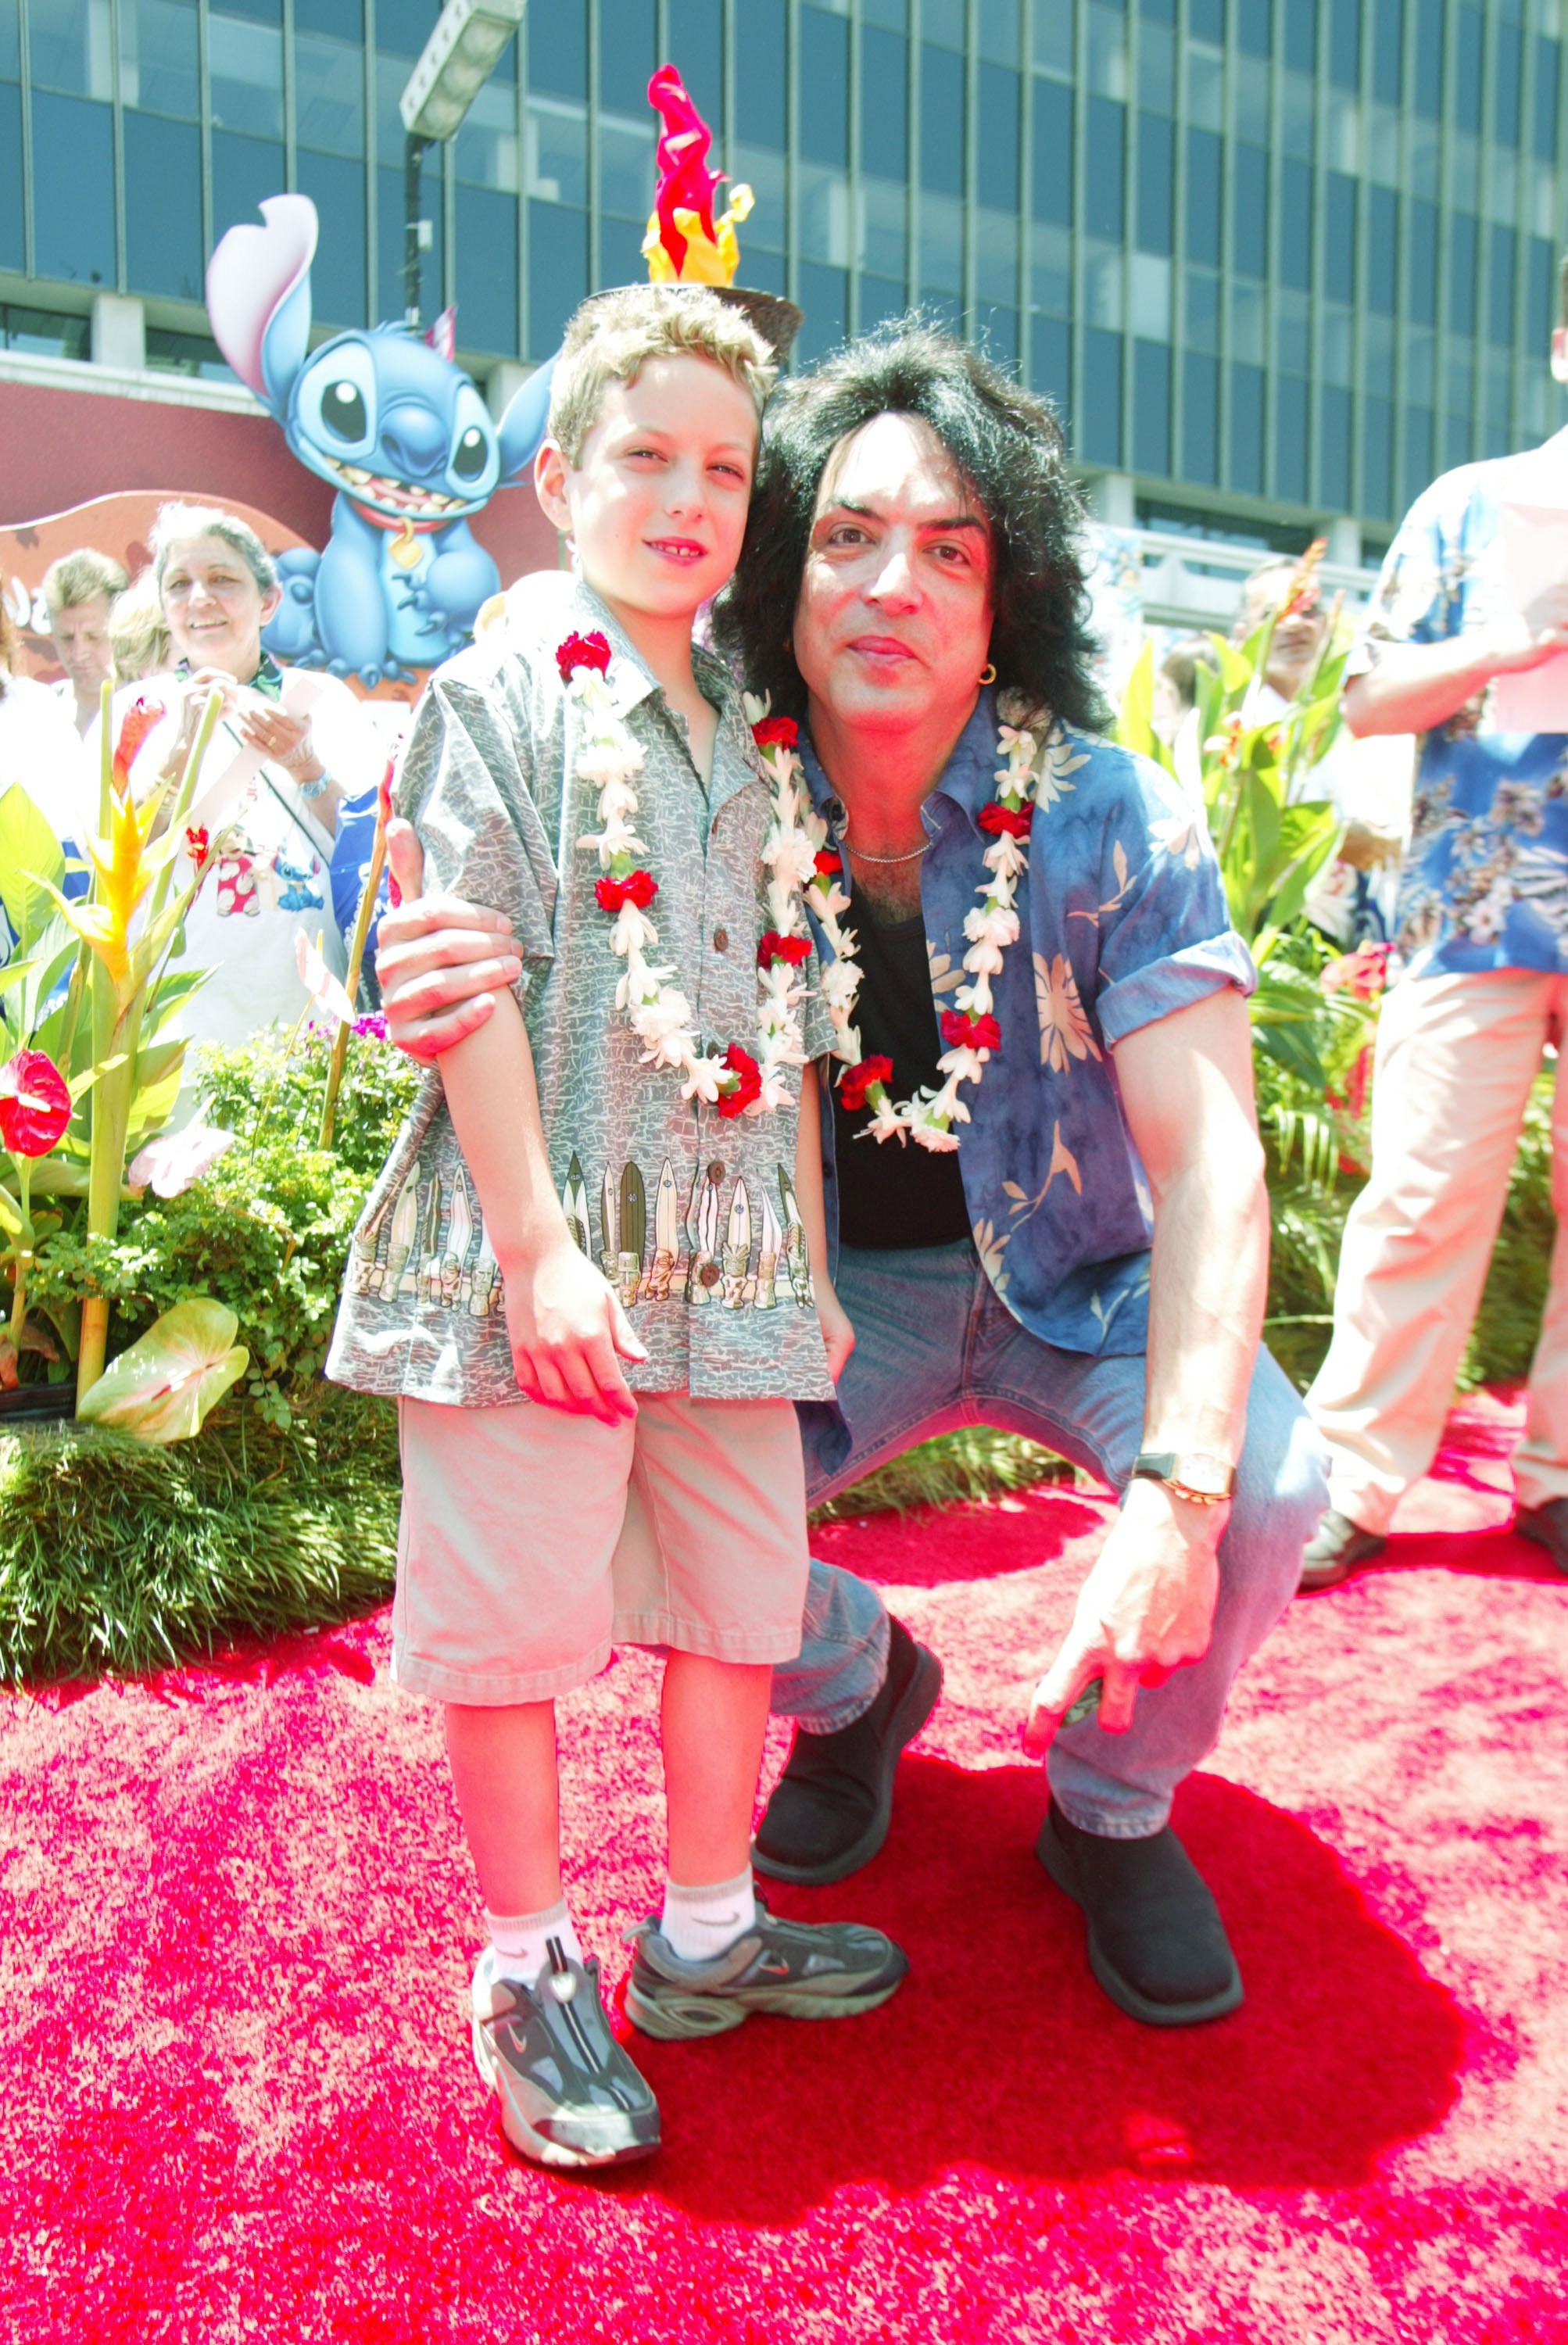 <p>KISS rocker Paul Stanley brought 8-year-old son Evan -- his only child with his first wife, actress Pamela Bowen -- to the premiere of "Lilo & Stitch" at the El Capitan Theatre in Hollywood on June 16, 2002. <span>Keep reading to see Evan as an adult</span>...</p>